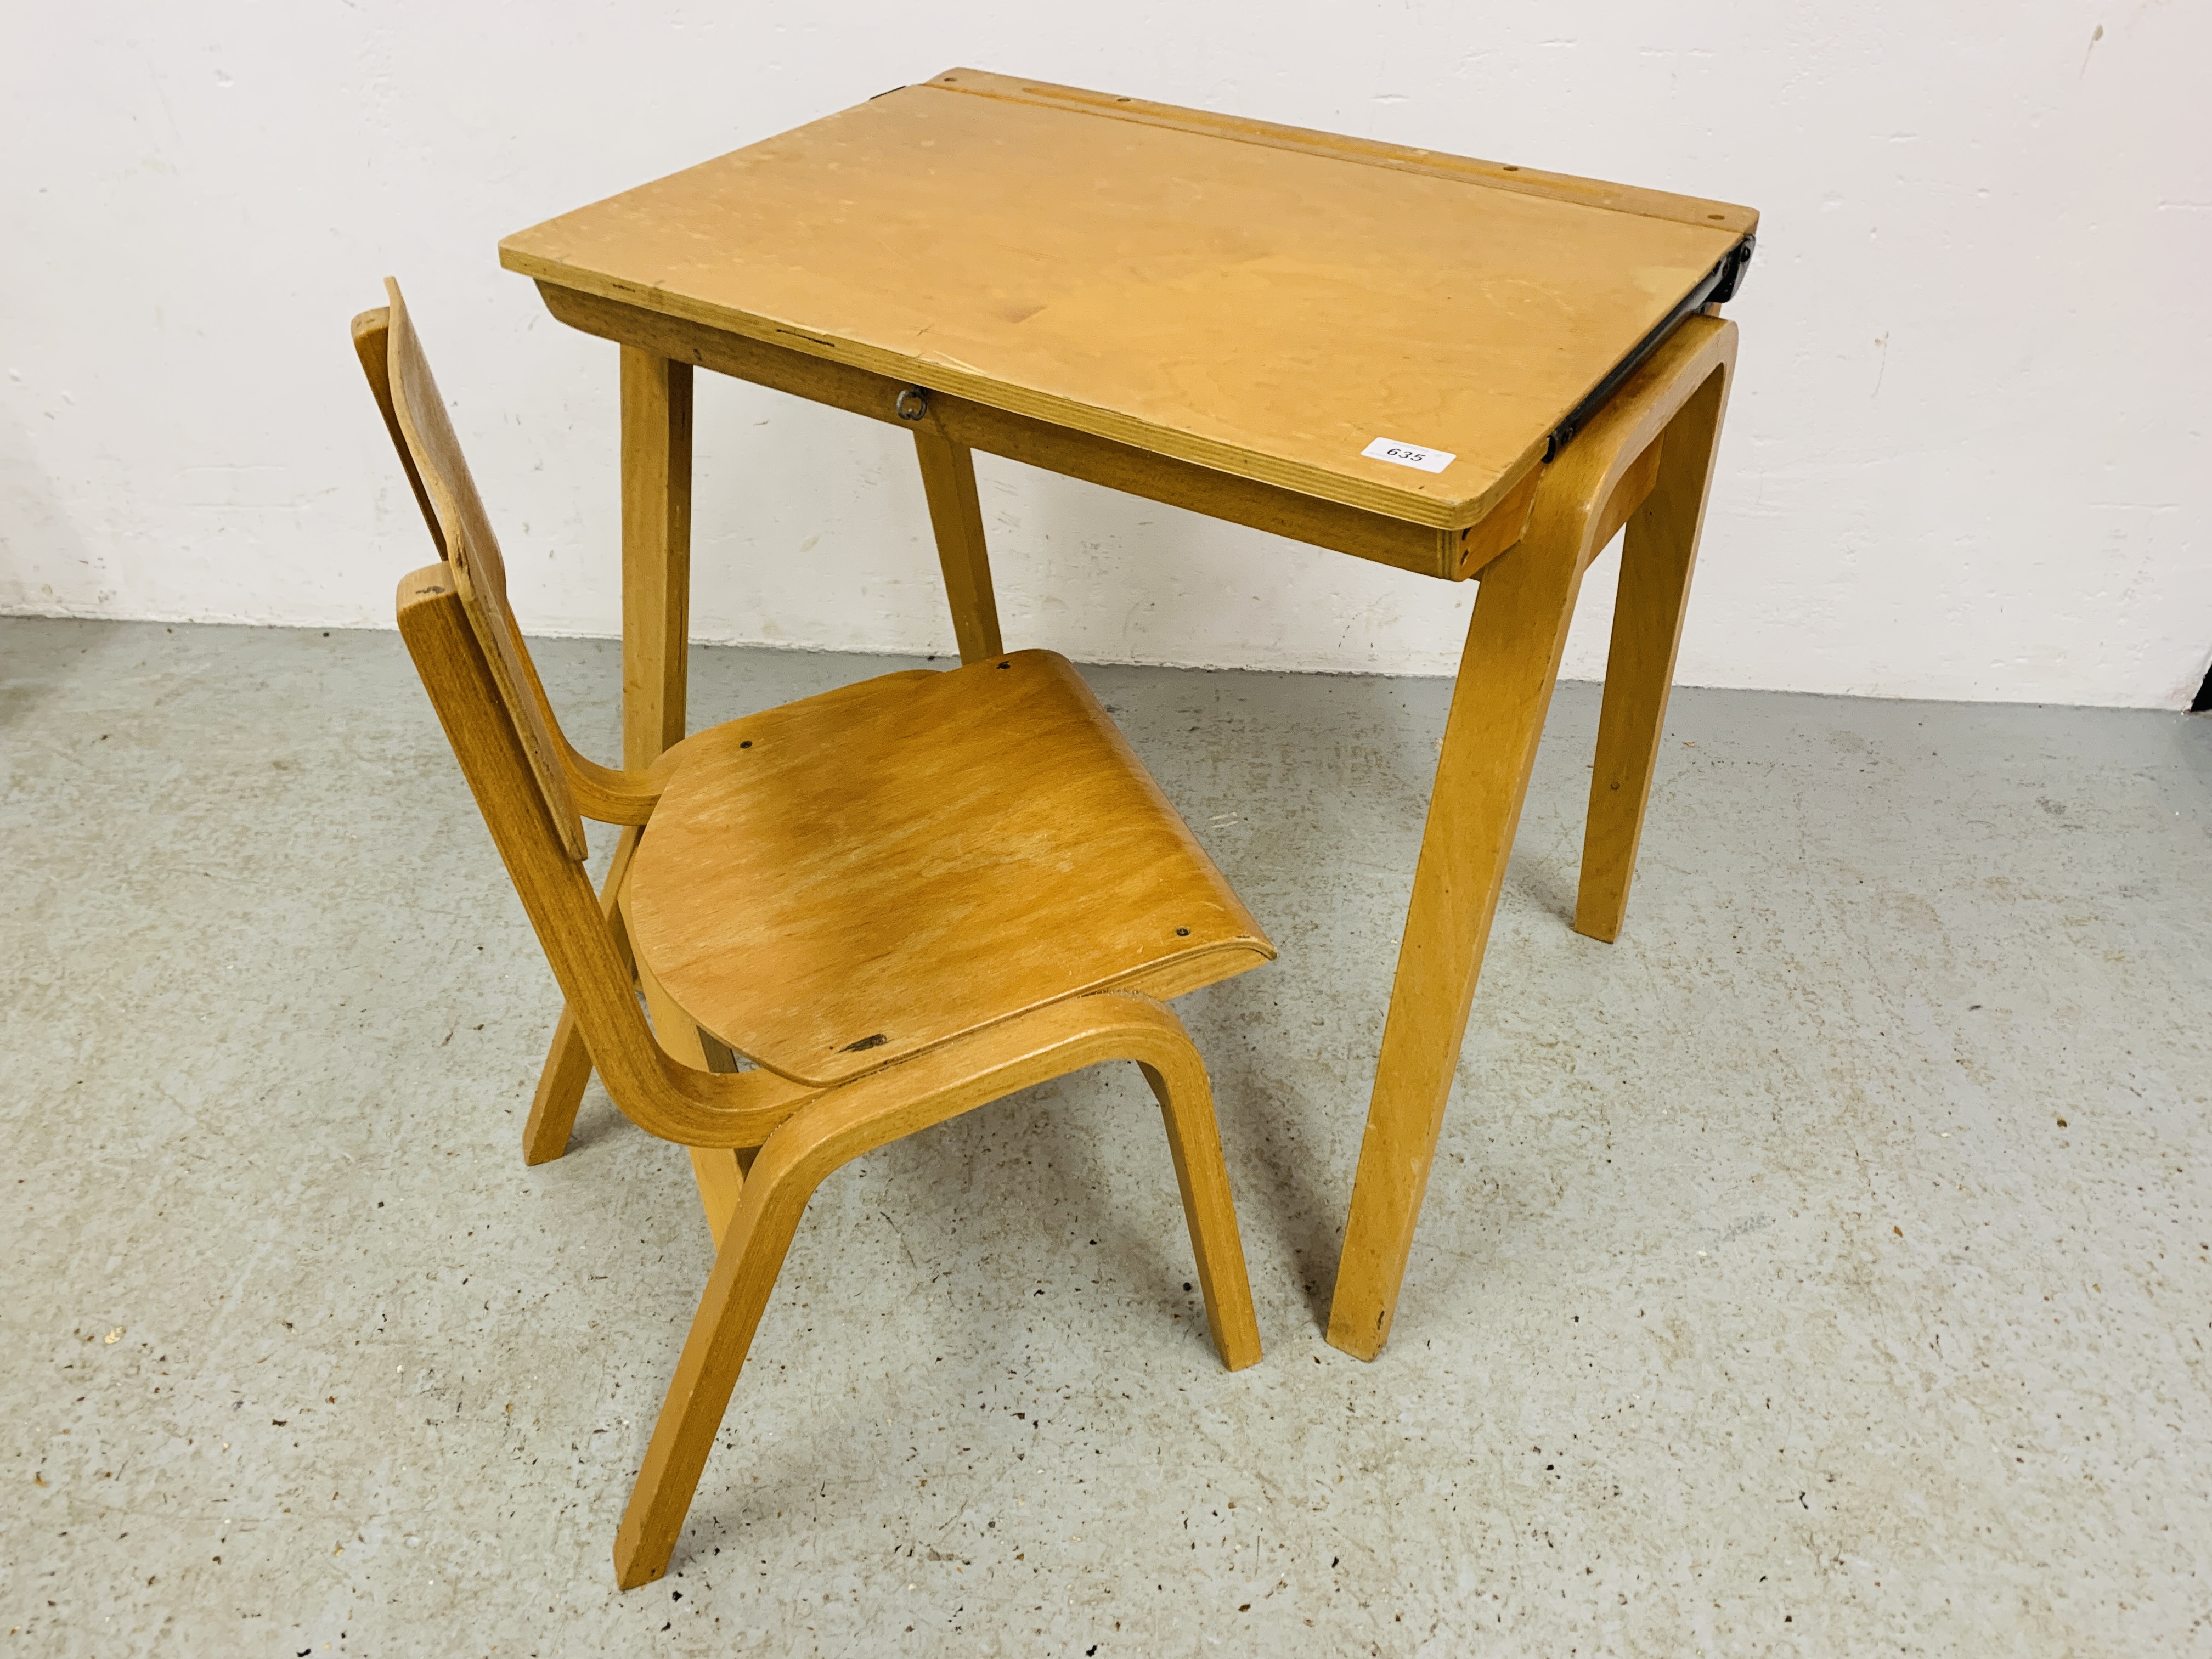 A SMALL CHILD'S DESK AND MATCHING CHAIR